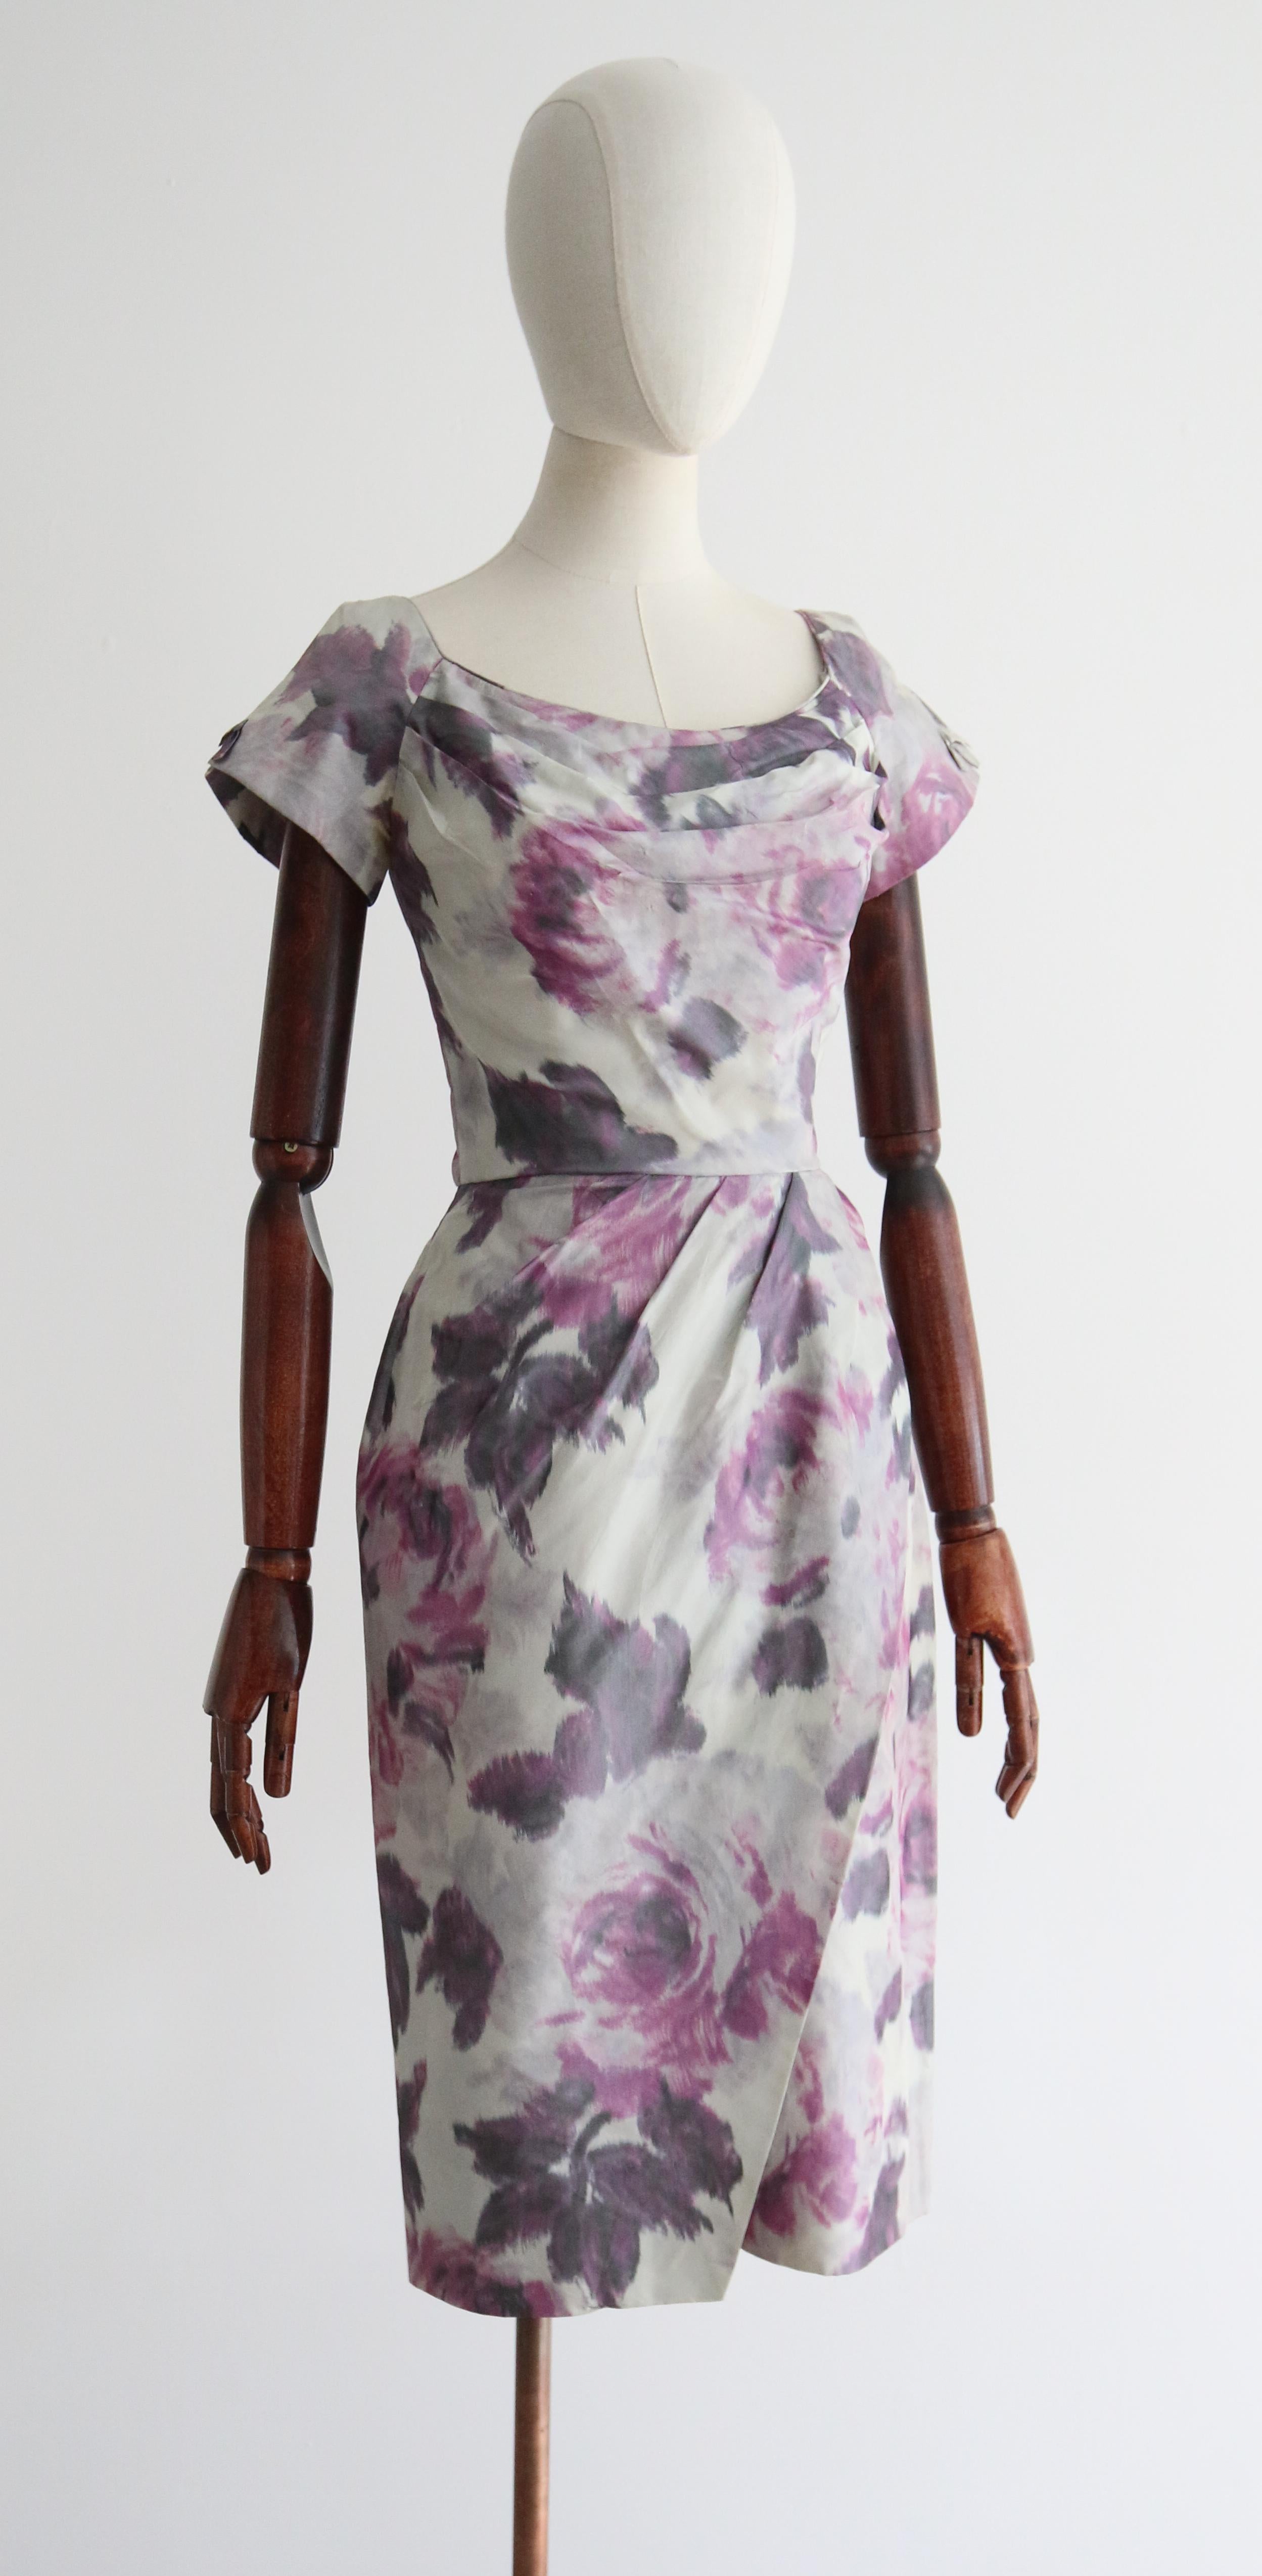 Vintage 1950's Lilac Watersilk Floral Dress UK 8 US 4 In Good Condition For Sale In Cheltenham, GB